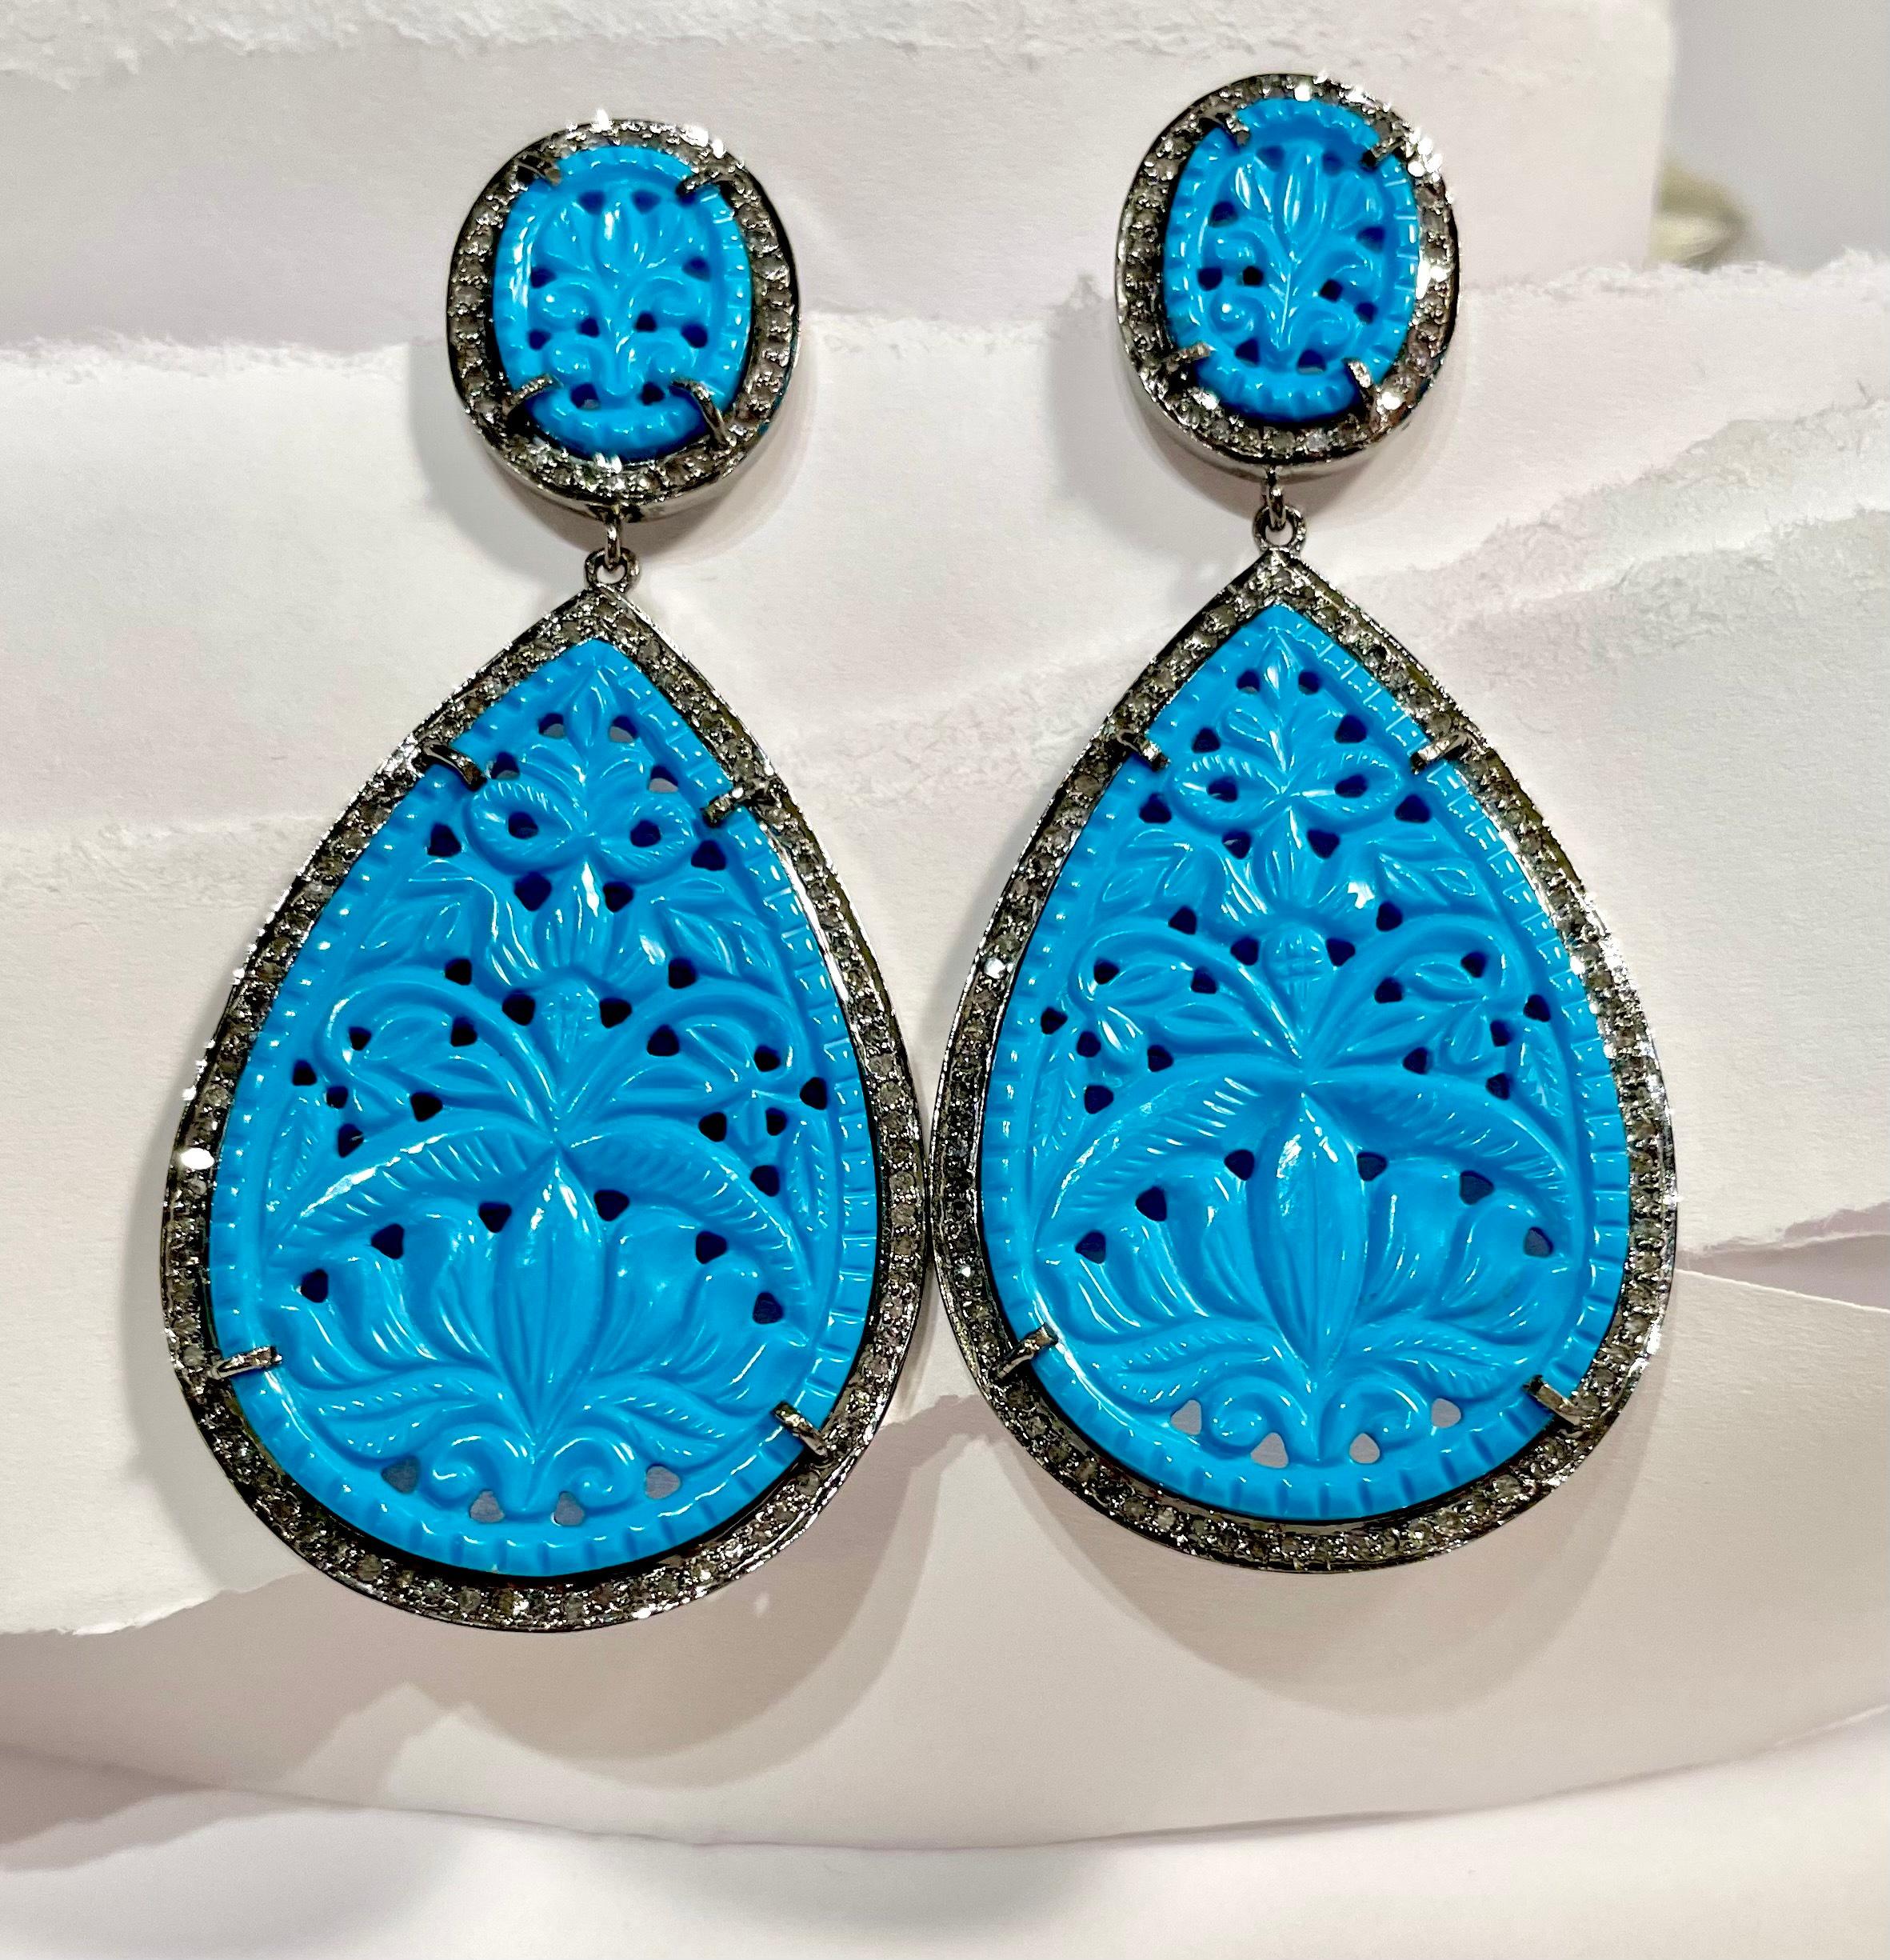 Description
Vibrant, striking and fun hand-carved Turquoise earrings framed with pave diamonds. 
Item # E3224

Materials and Weight
Turquoise, 30 x 40mm pear shape, 57 carats.
Pave diamonds 1.5 carats
Posts with jumbo backs, 14k yellow gold 
Rhodium